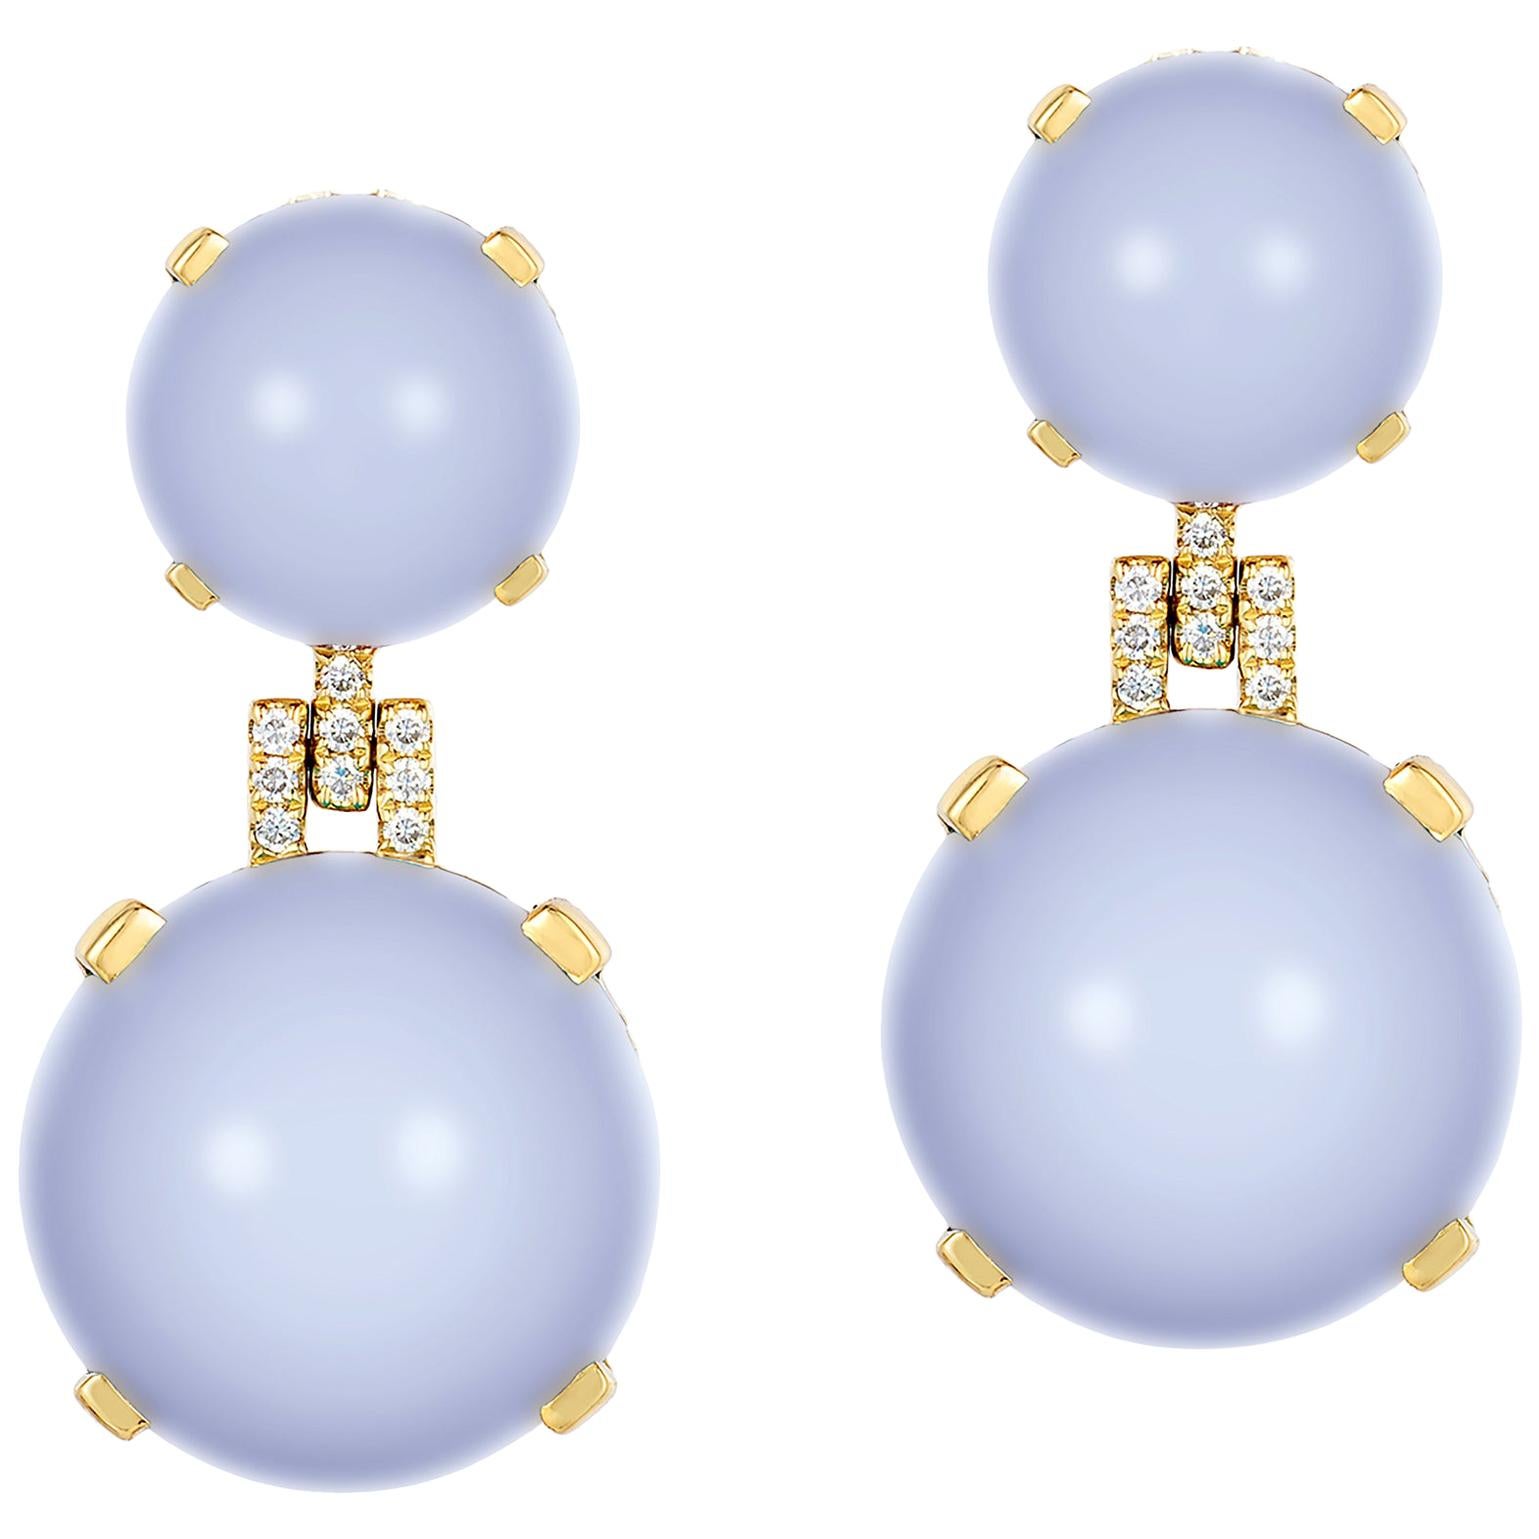 Goshwara Cabochon Blue Chalcedony And Diamond Earrings For Sale